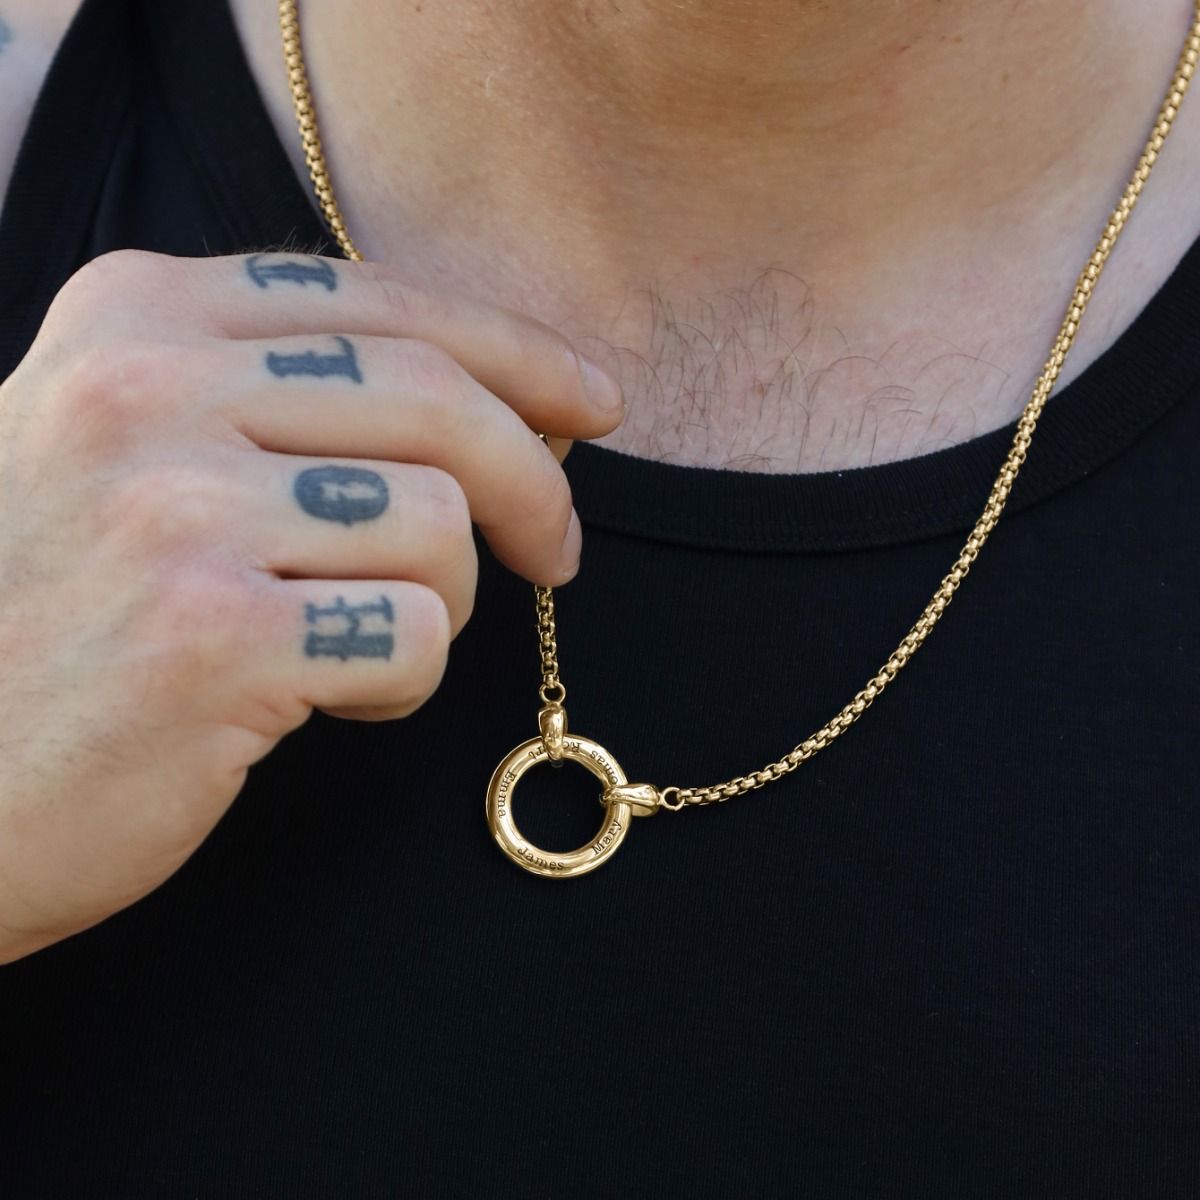 Buy Silver-Toned Chains for Men by Salty Online | Ajio.com